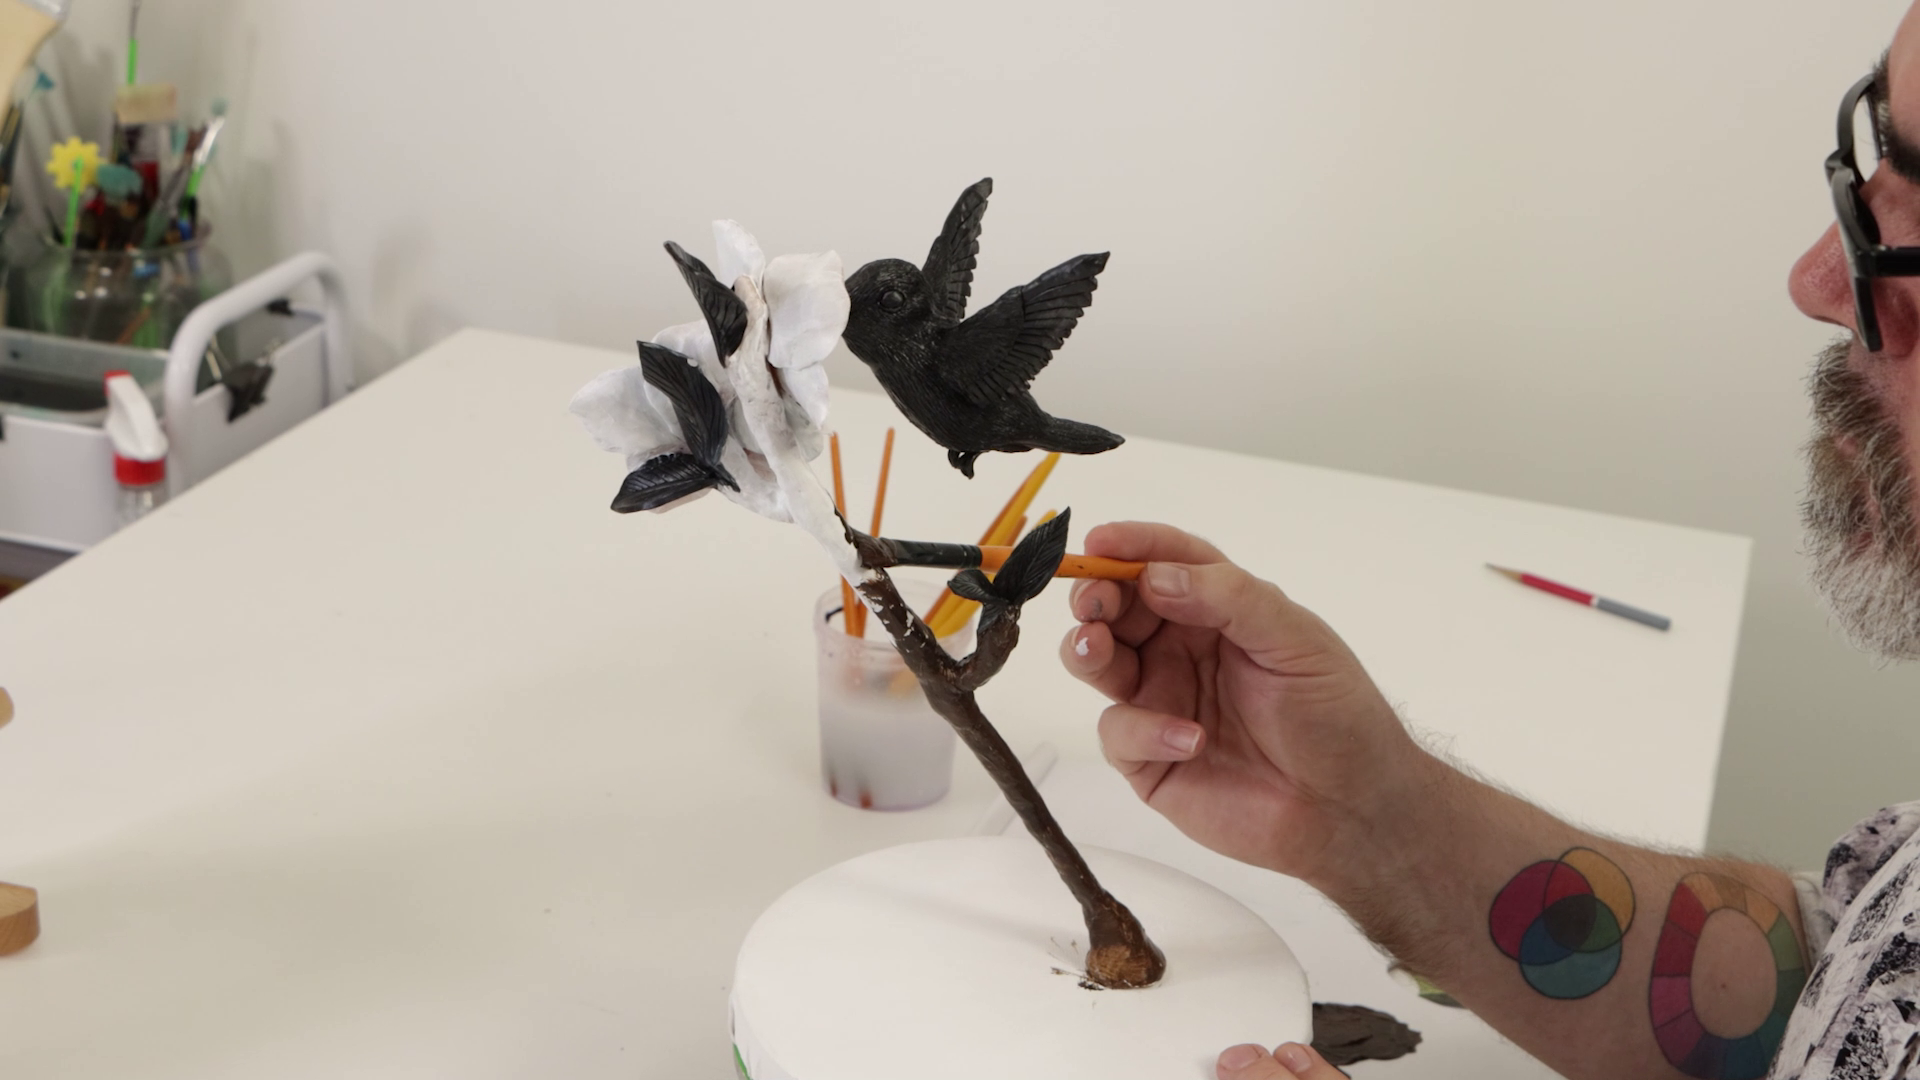 Hummingbird and flower branch sculpture being painted with black and white base coat